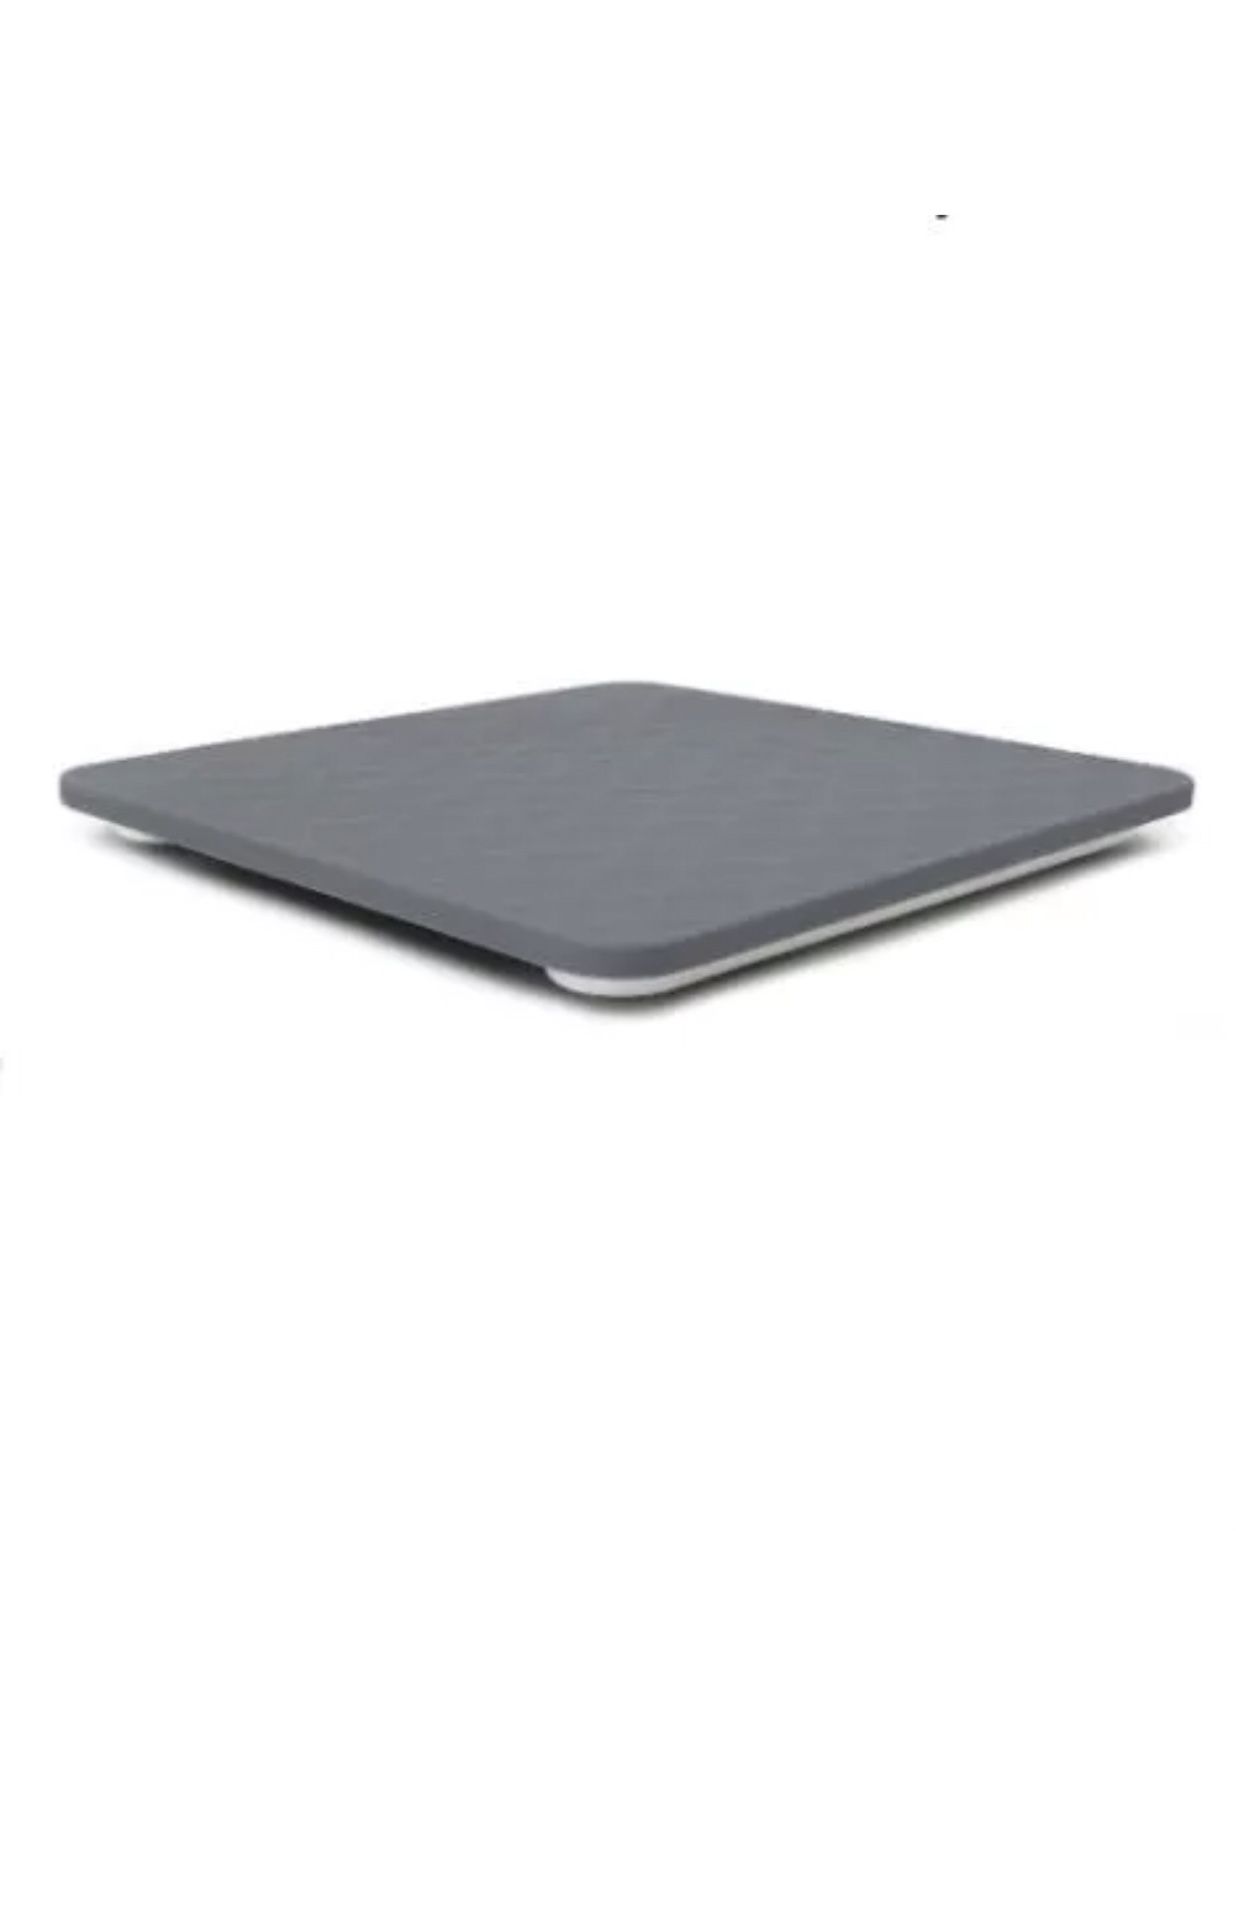 Designer Bathroom Scale with Textured Silicone Cover Gray -Greater Goods